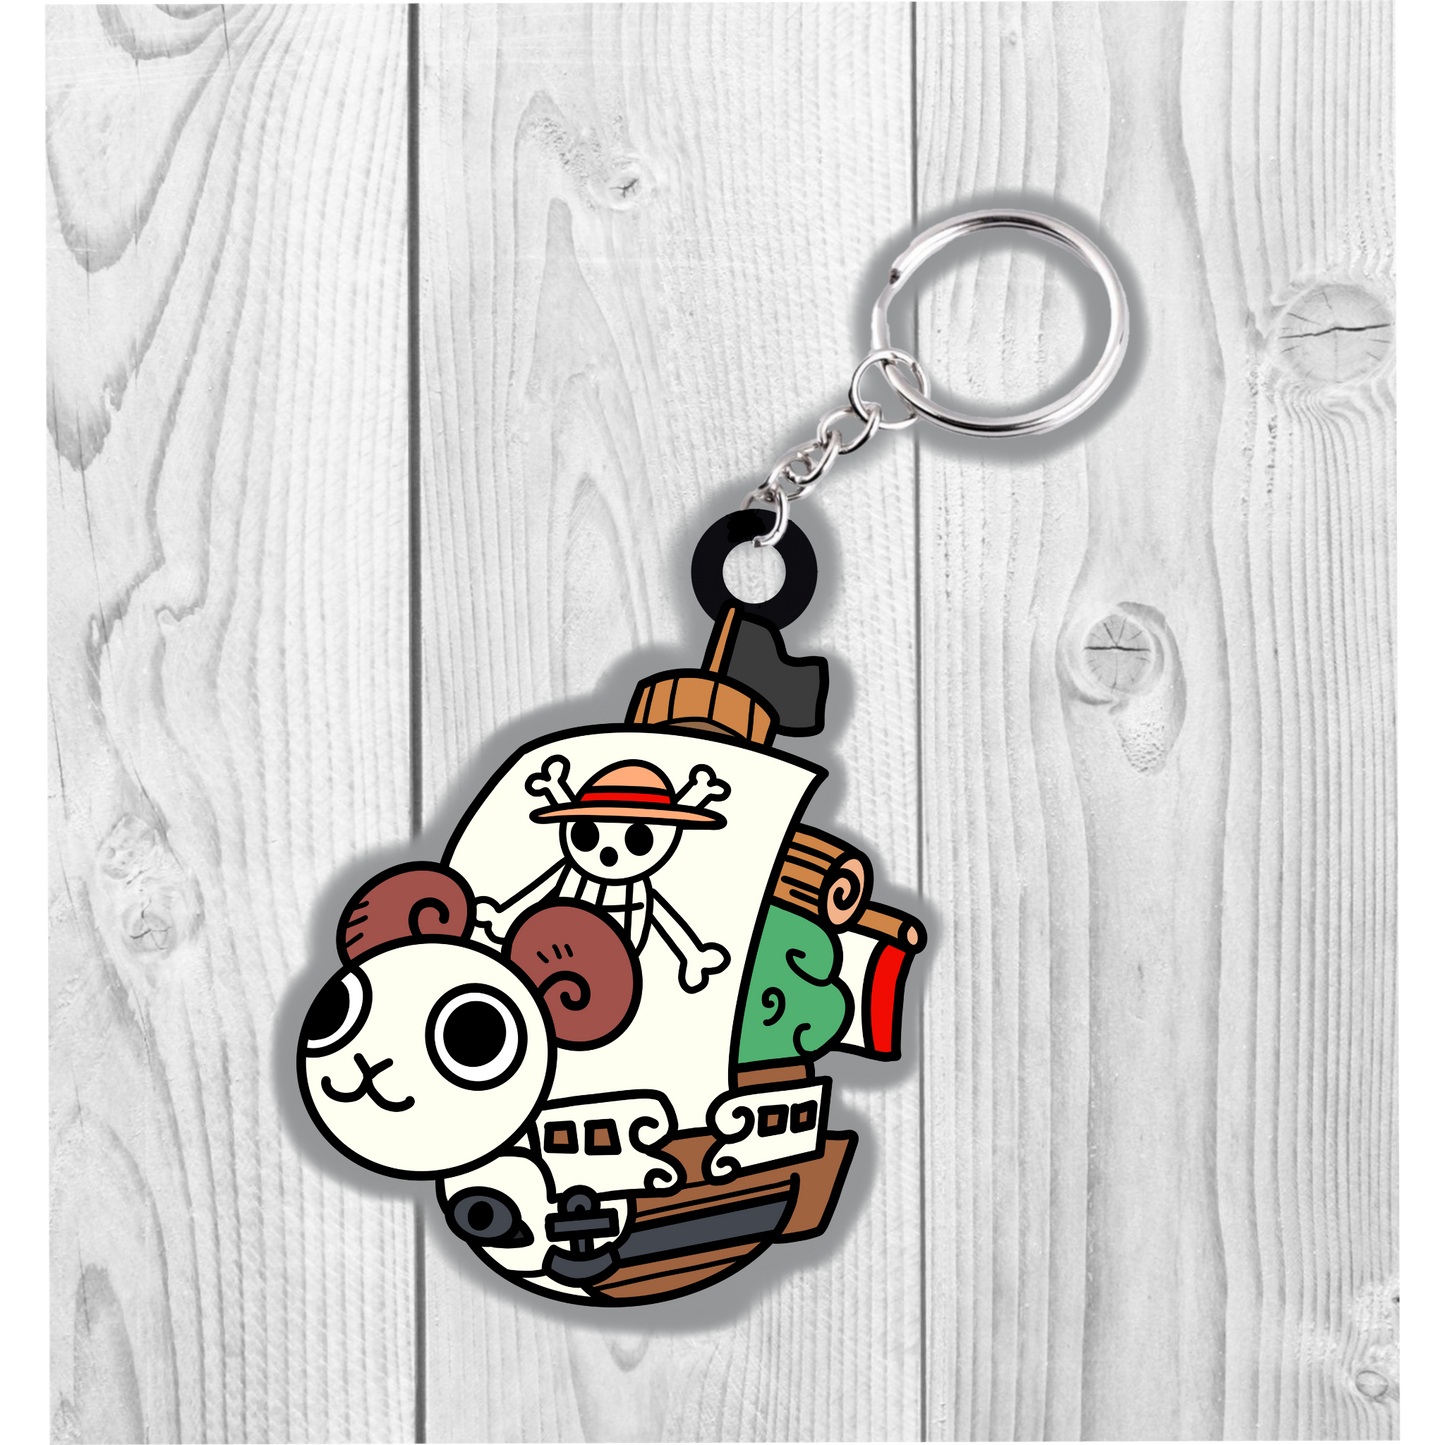 Going merry (OP Pirate) Keychain